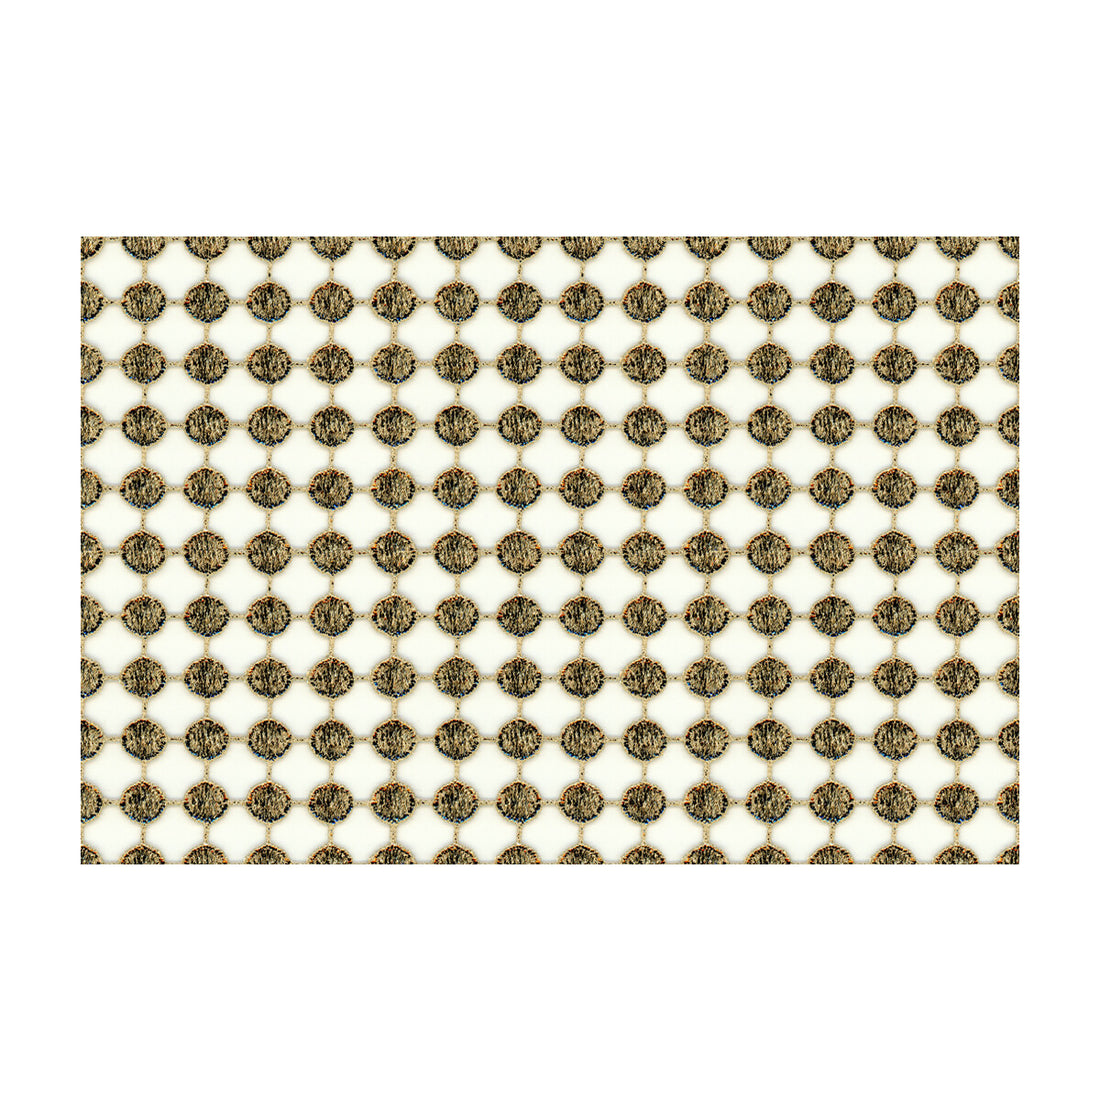 Party Favors fabric in truffle color - pattern 3987.404.0 - by Kravet Couture in the Modern Luxe collection